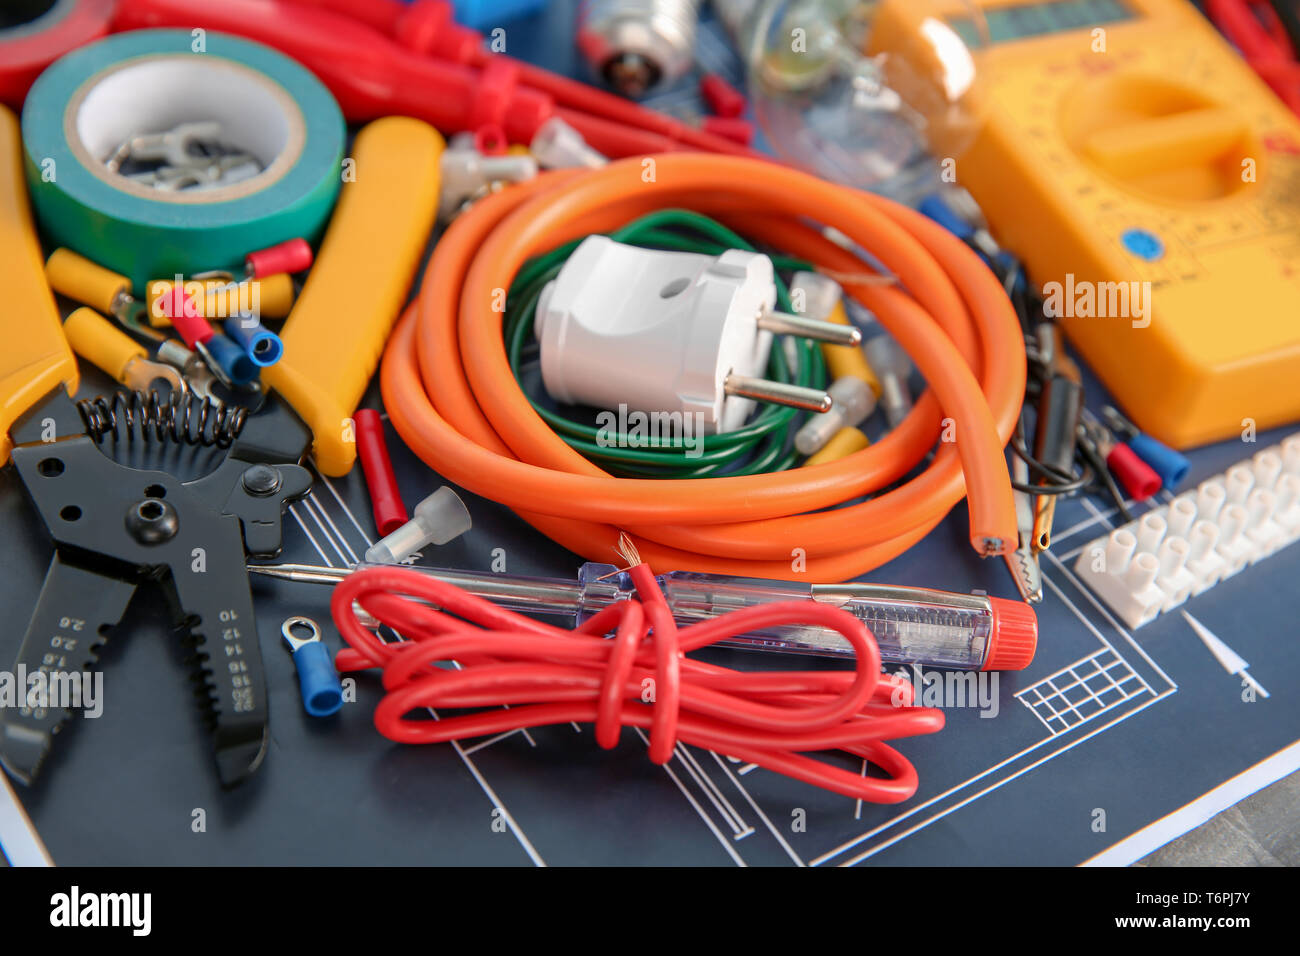 Different electrical tools on house plan Stock Photo - Alamy